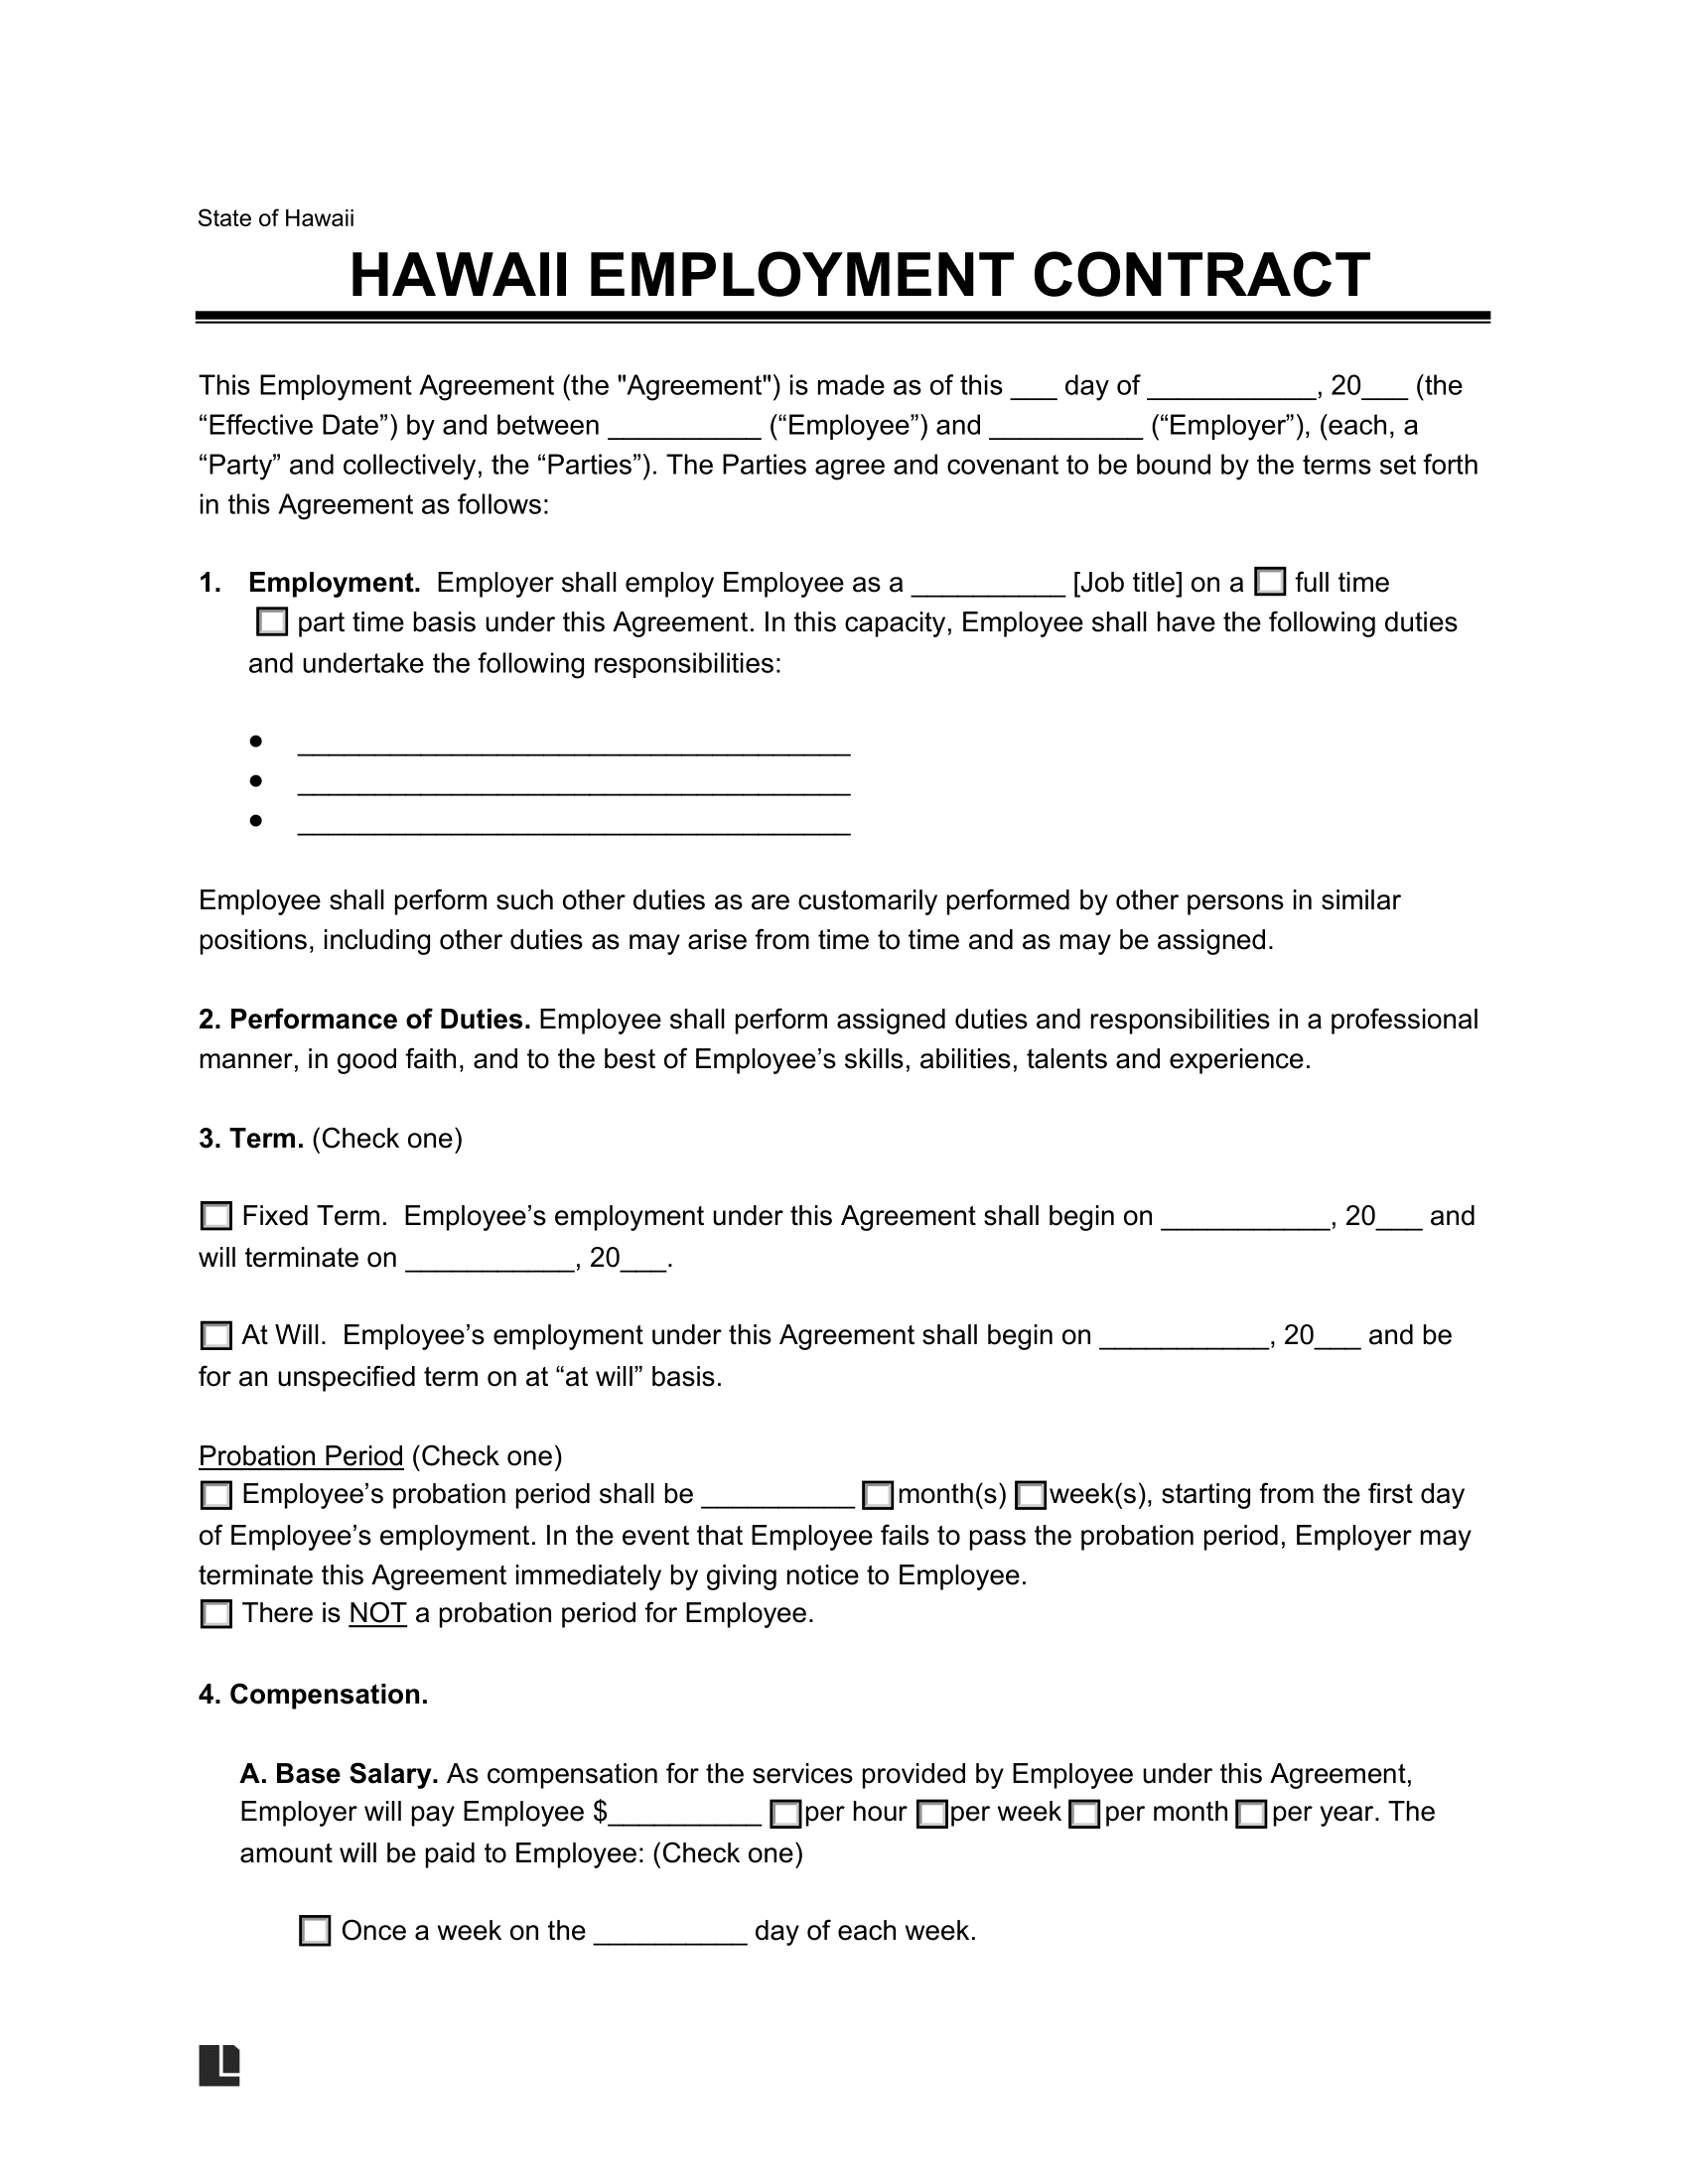 hawaii employment contract template